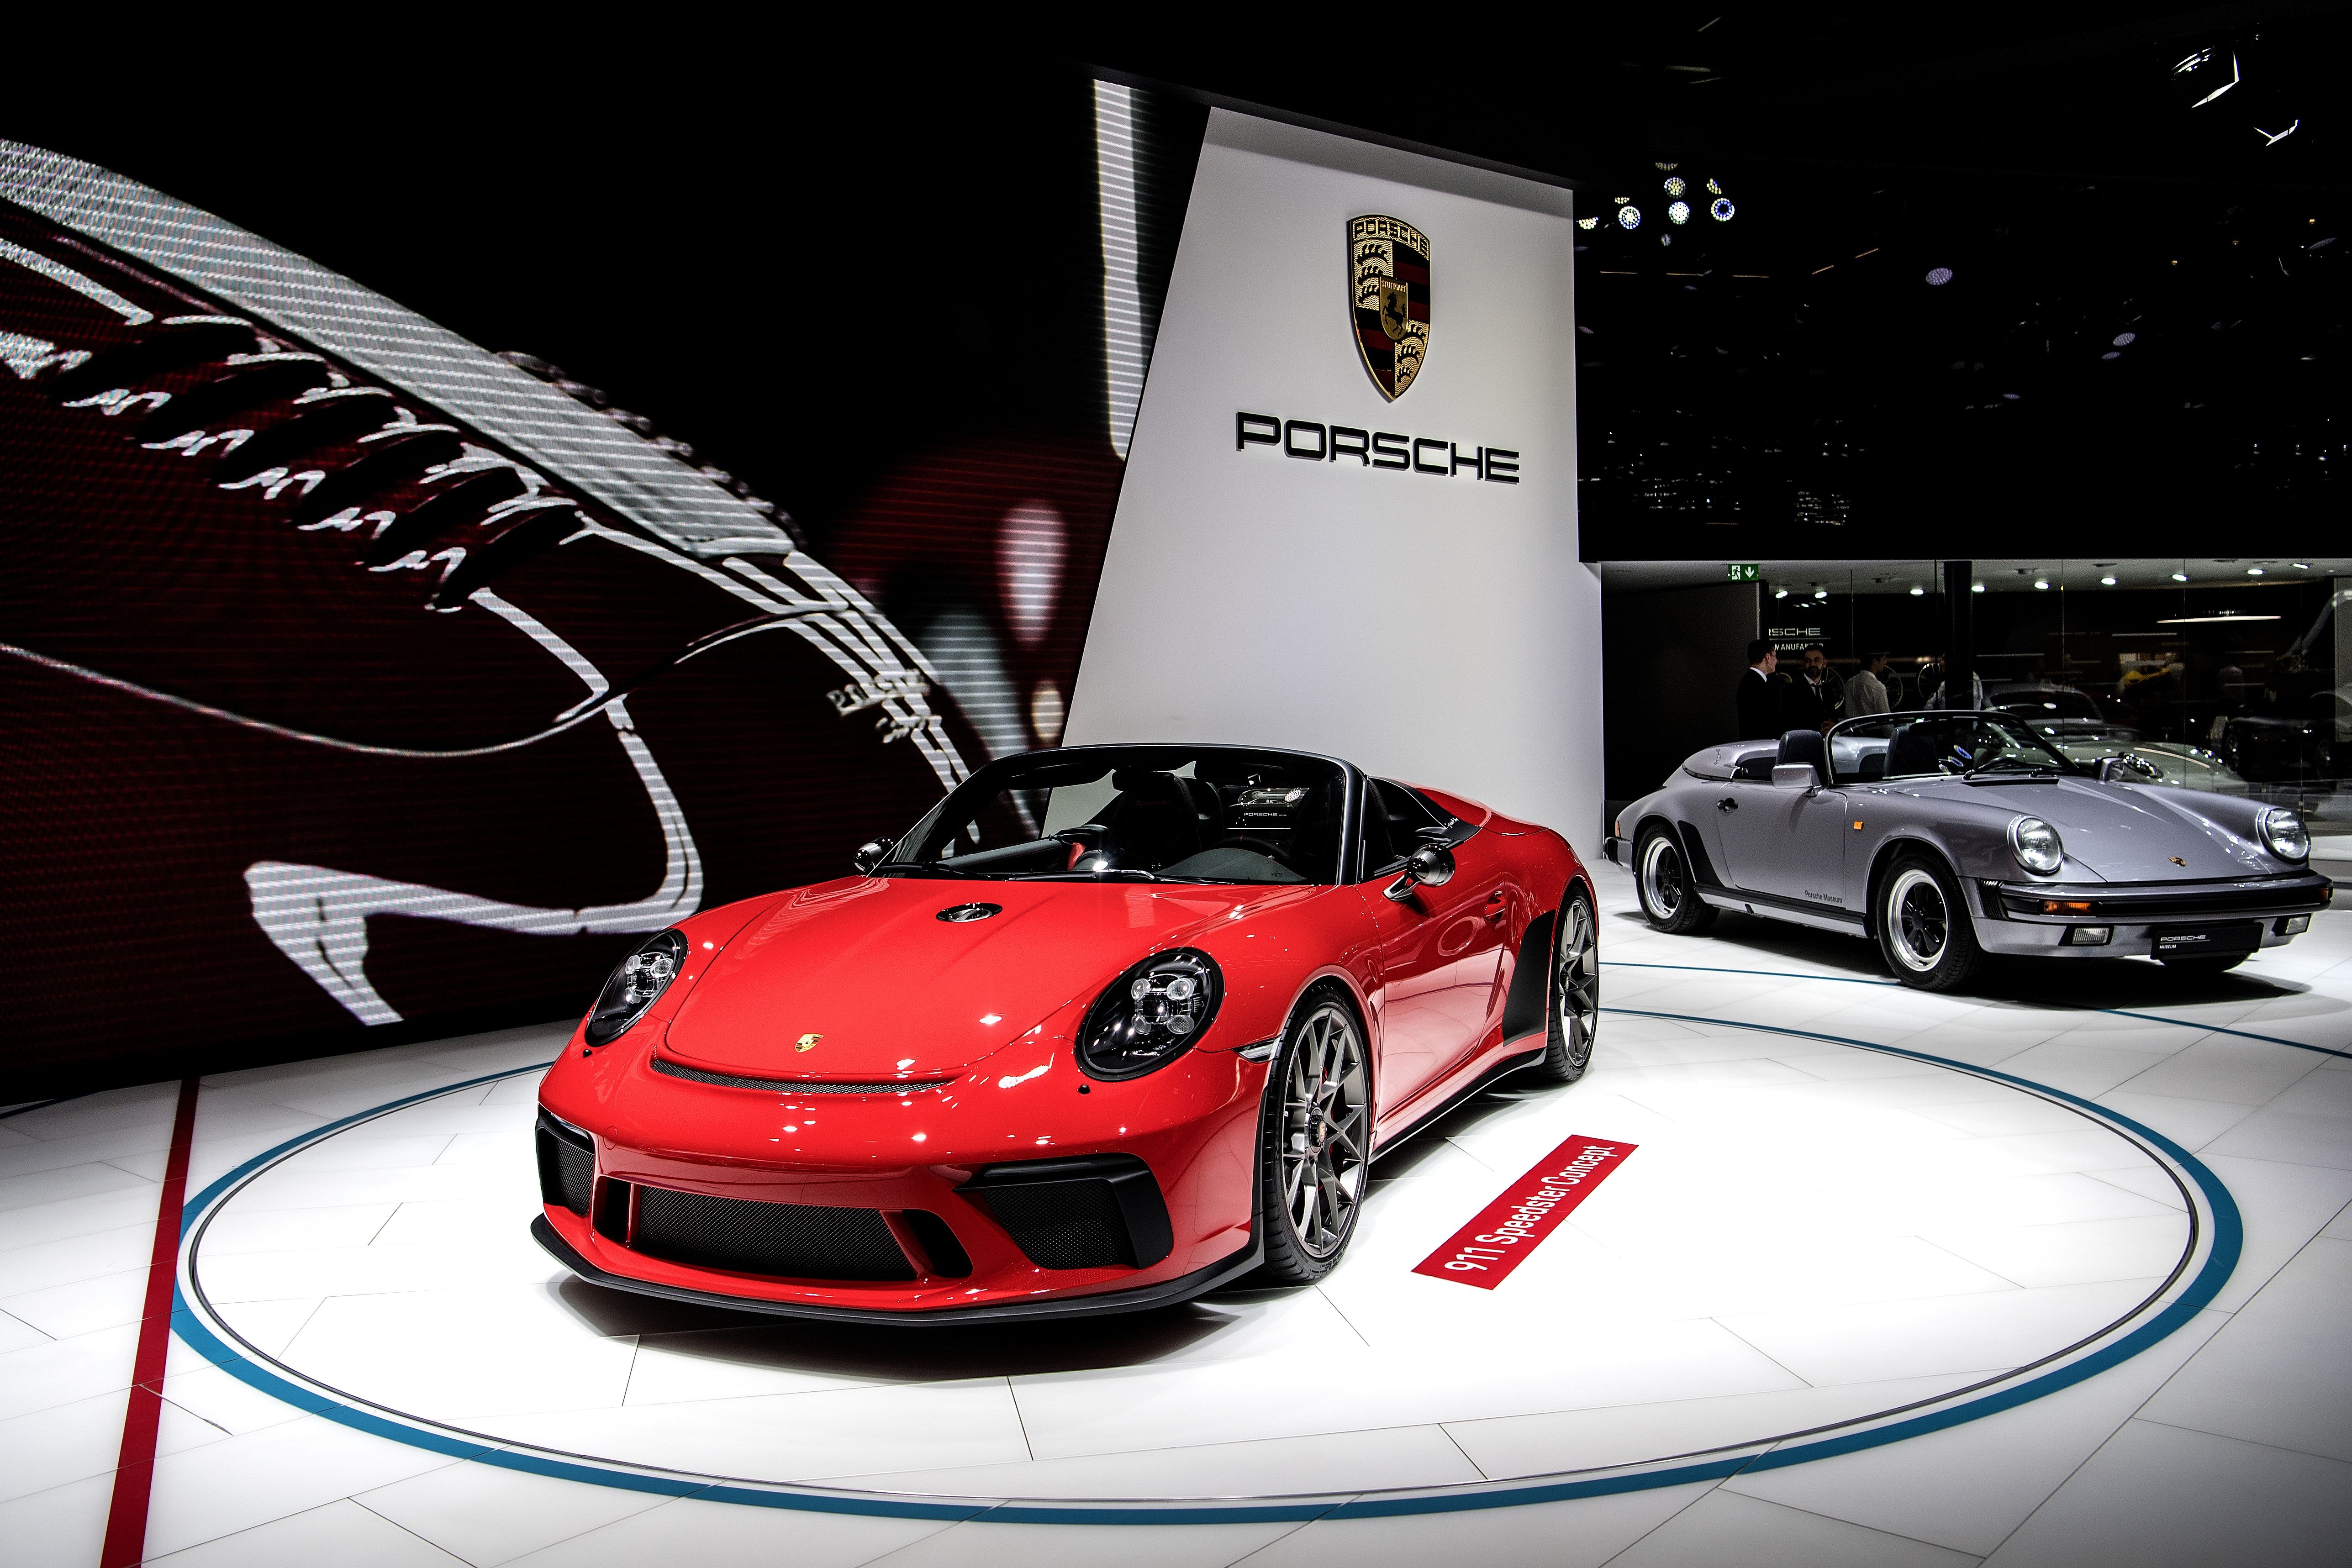 Porsche investing $24 million in 'e-fuels' for traditional sports cars